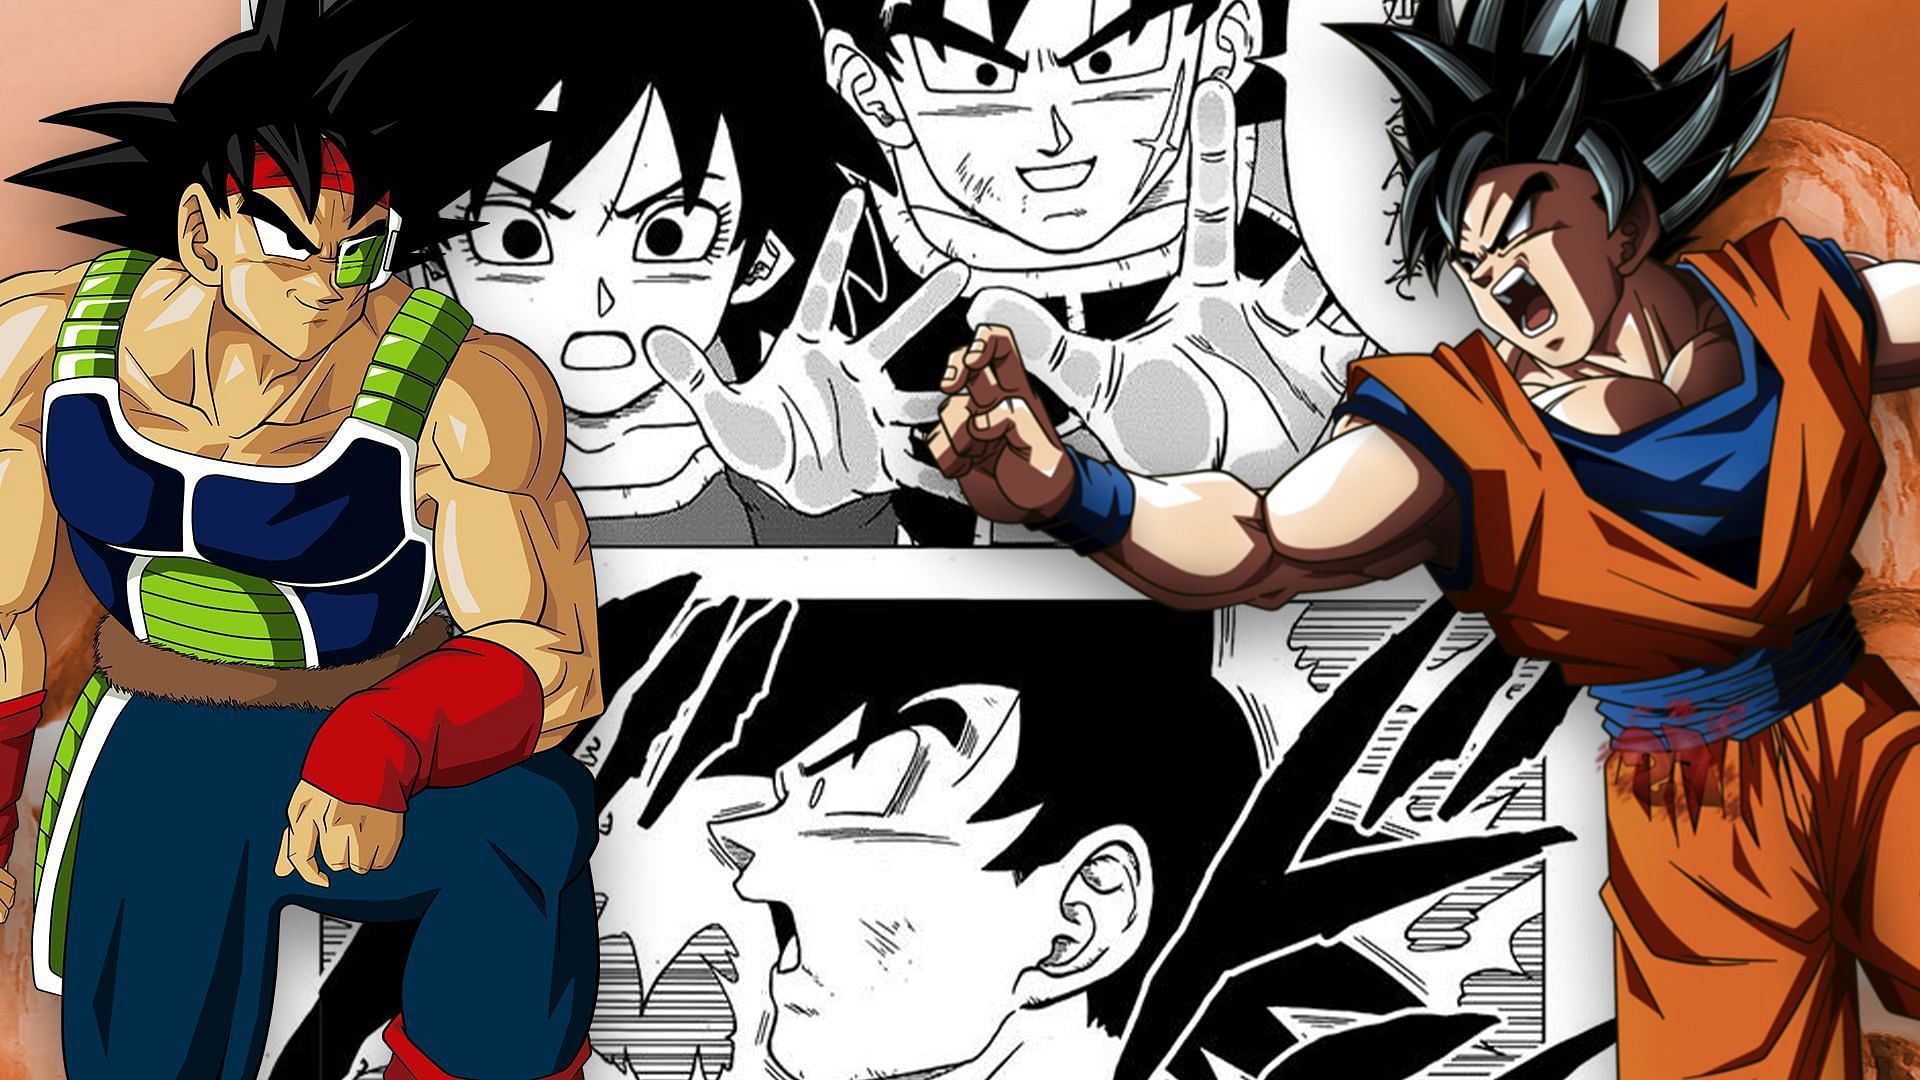 The Return Of Bardock, Father Of Goku - Chapter 2: Welcome To